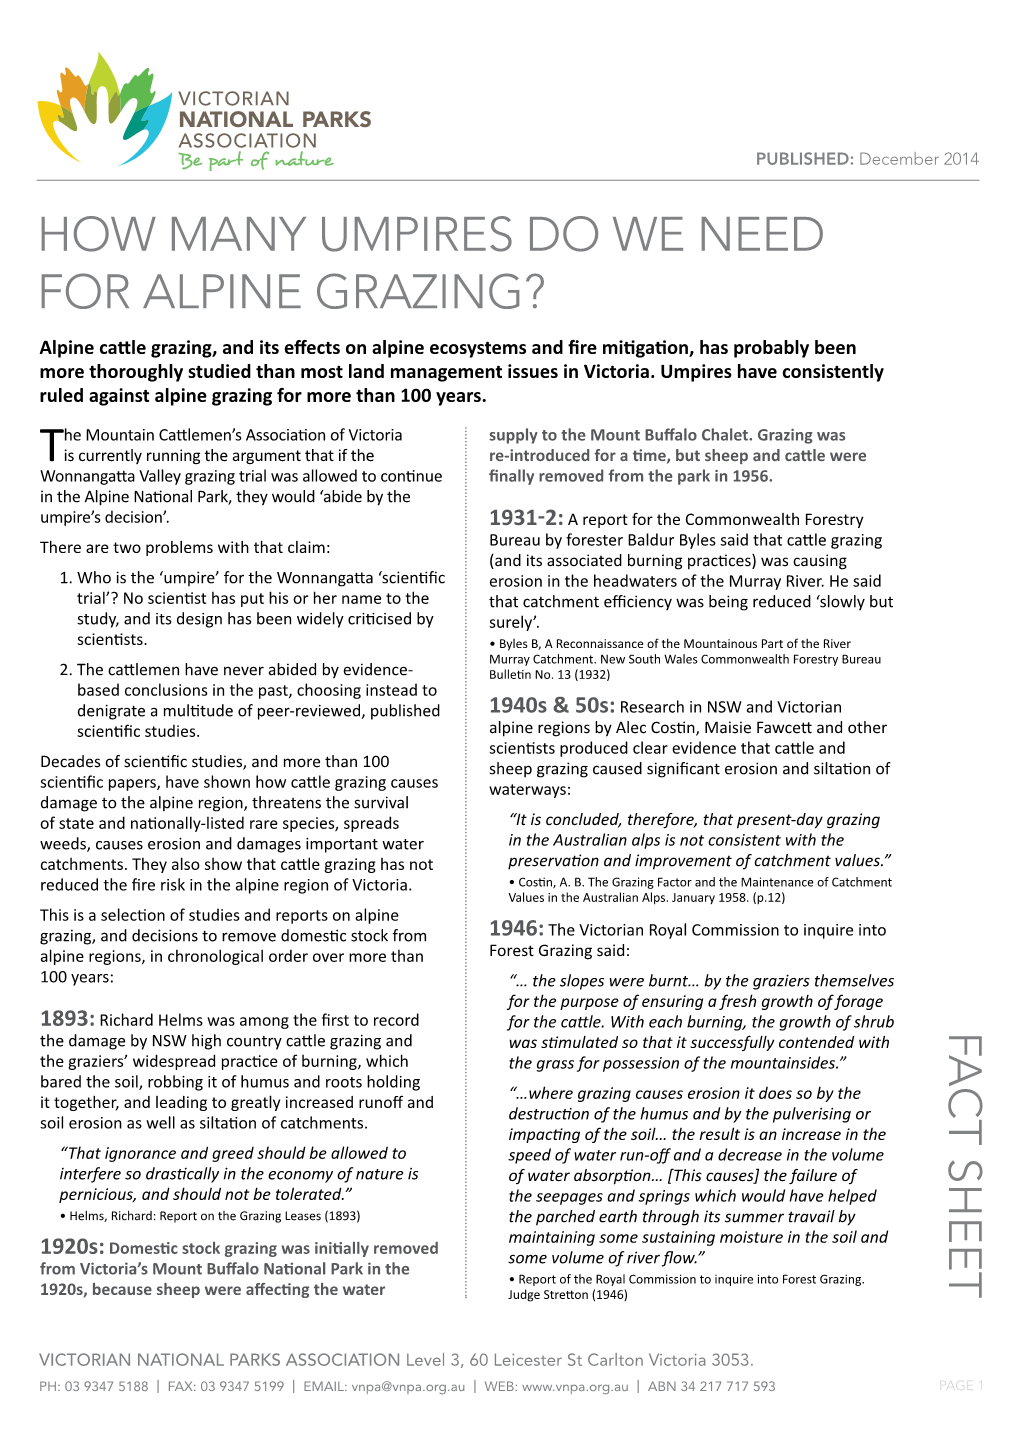 Fact Sheet: How Many Umpires Do We Need for Alpine Grazing?